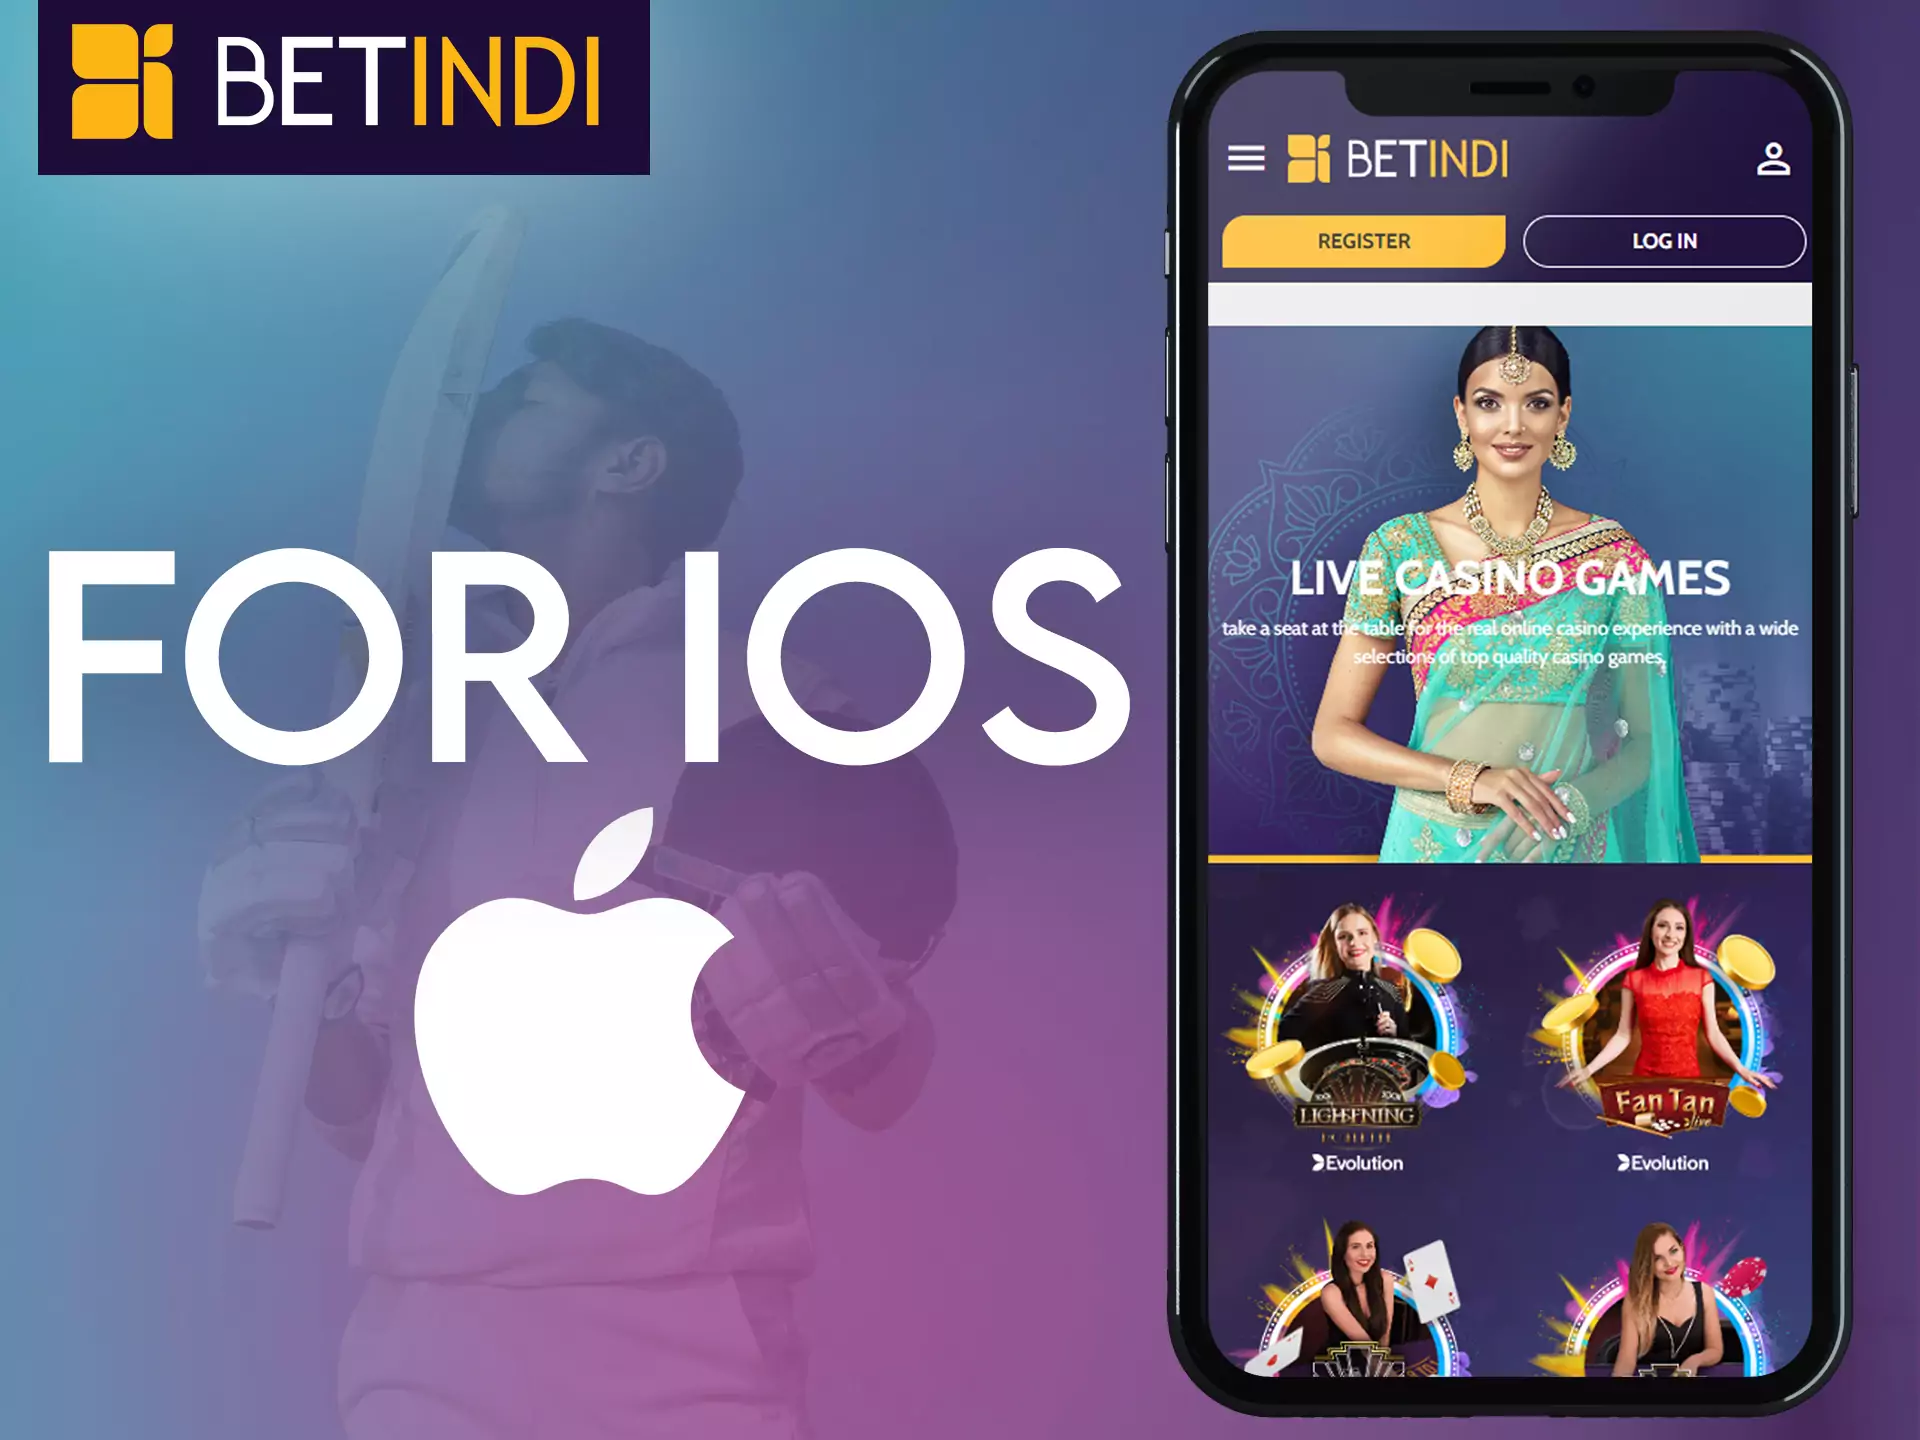 Install Betindi on your iOS device to place bets and play with pleasure.